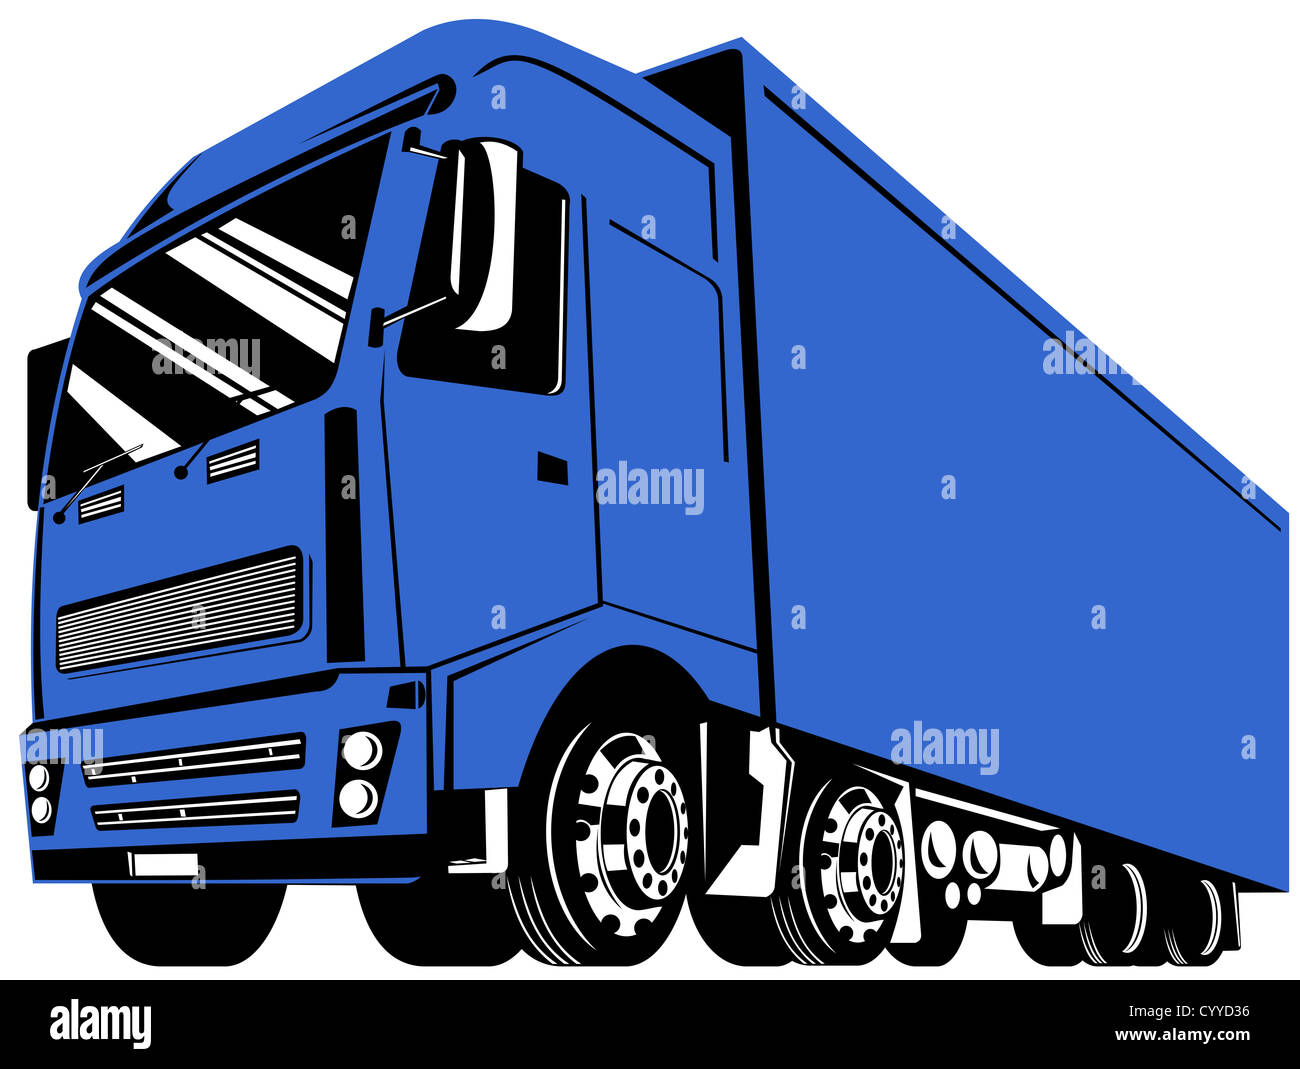 illustration of a container truck lorry done in retro style on isolated background viewed from low angle Stock Photo